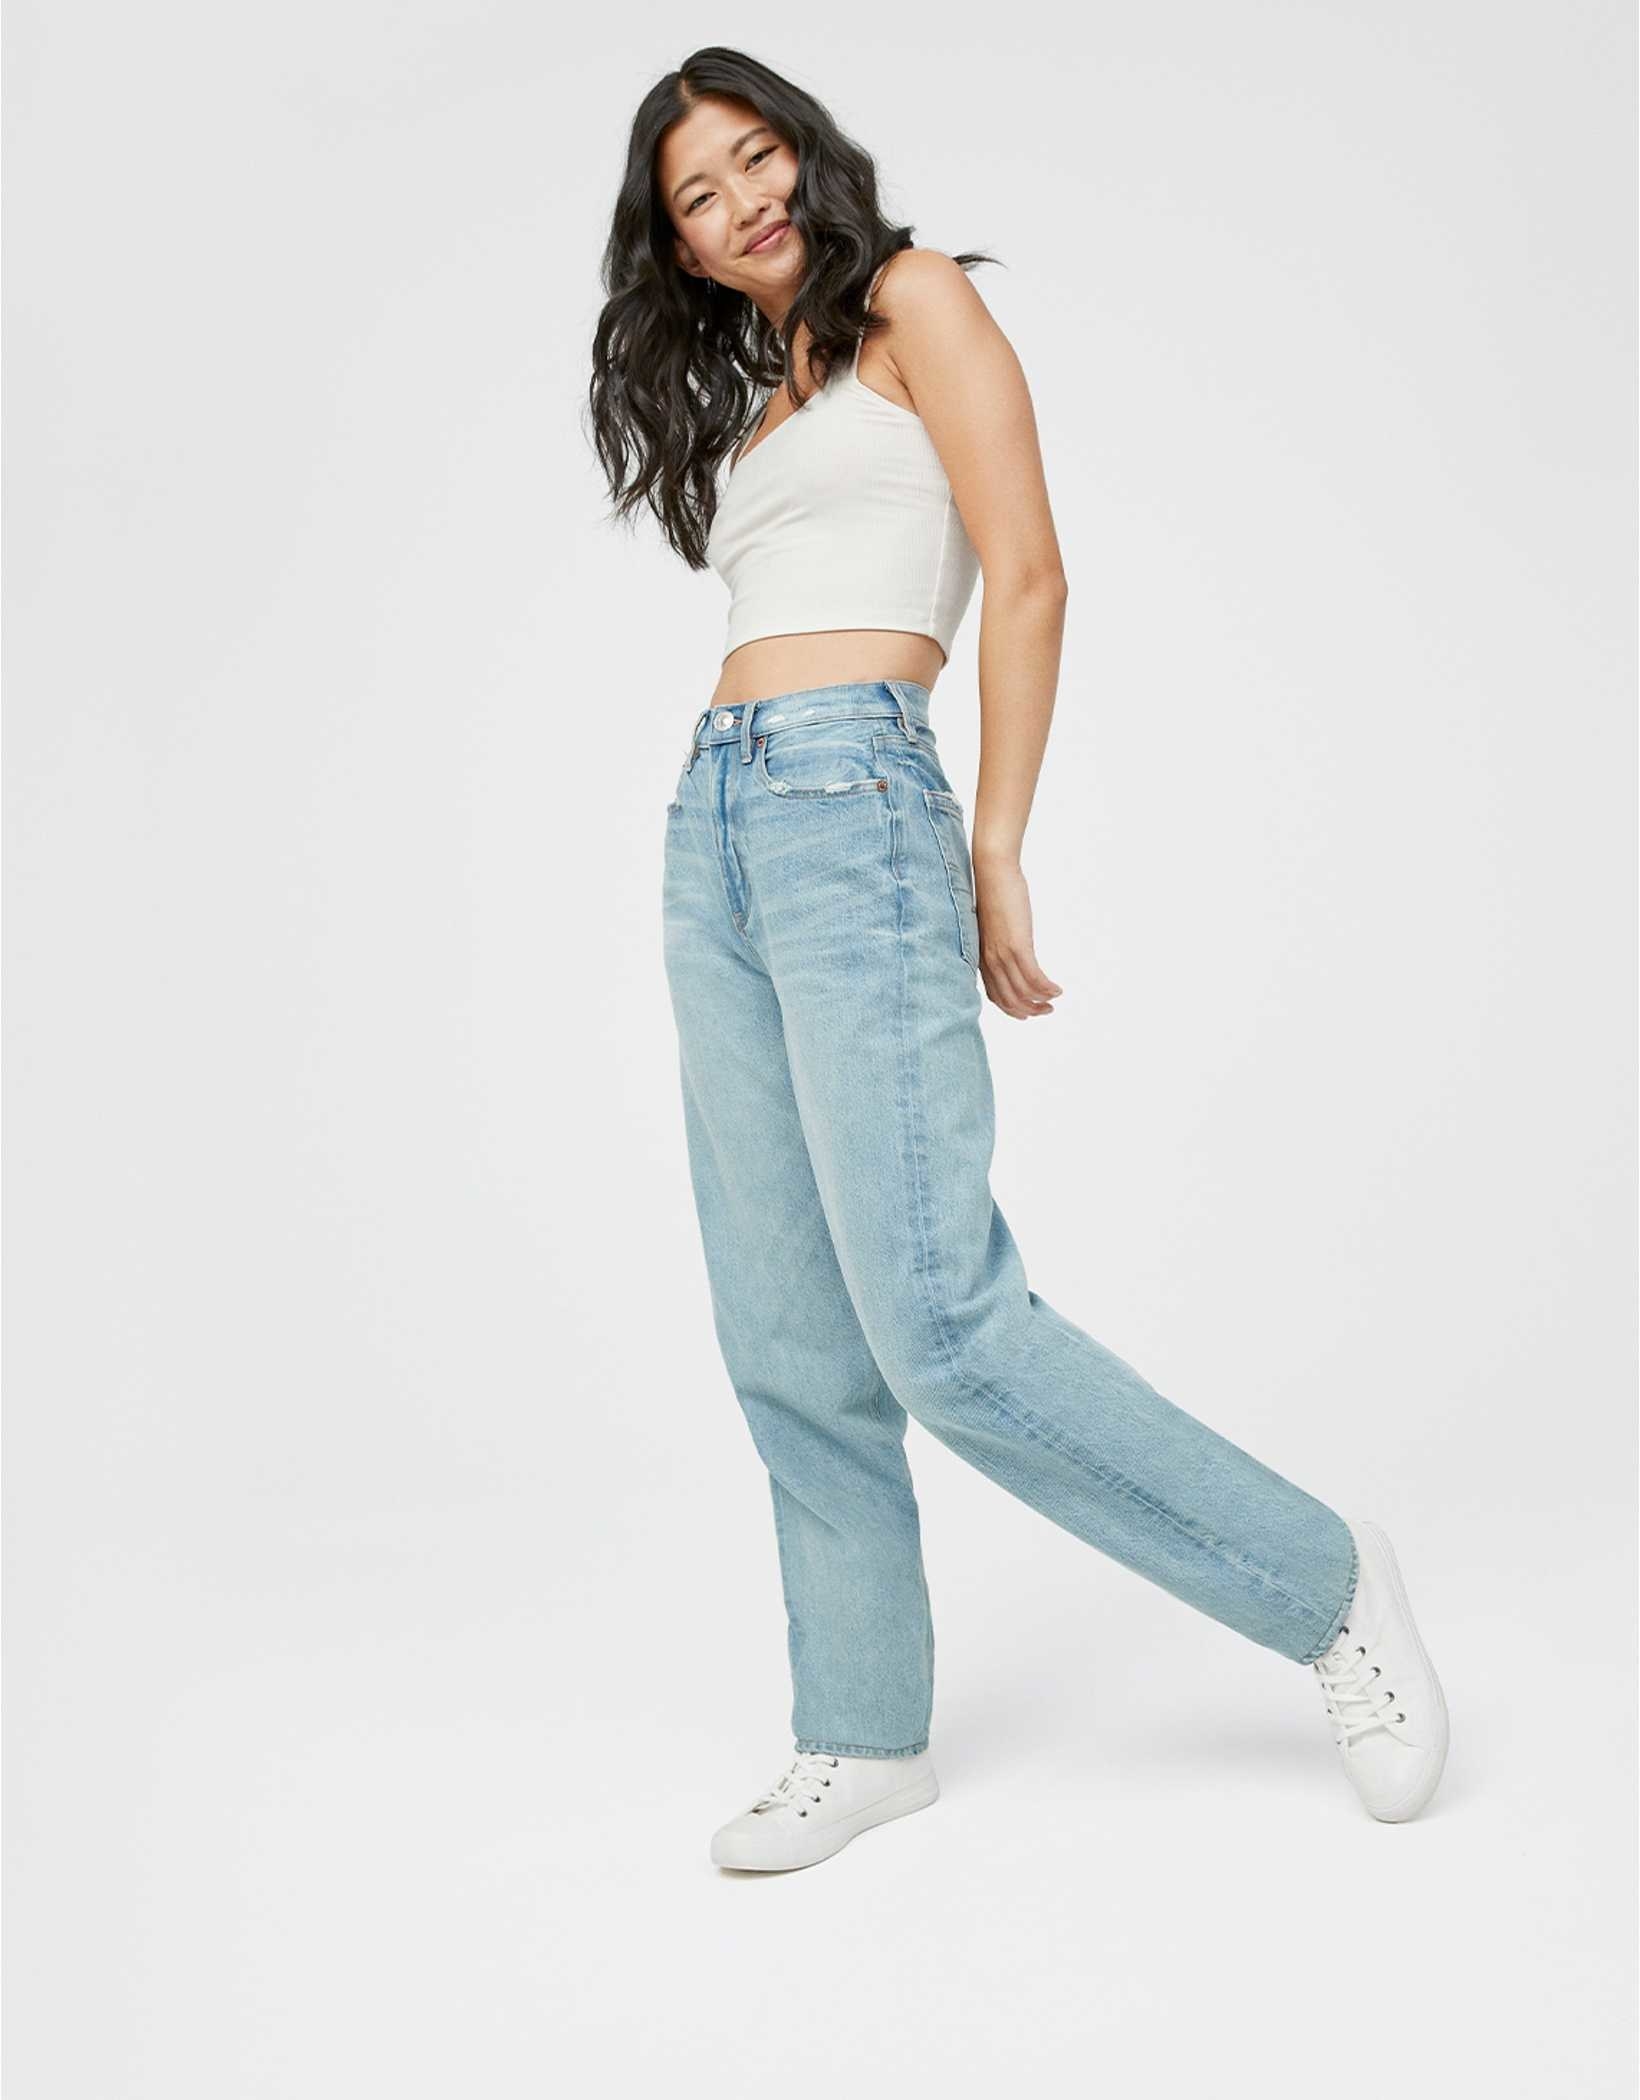 A model wearing a pair of baggy mom jeans